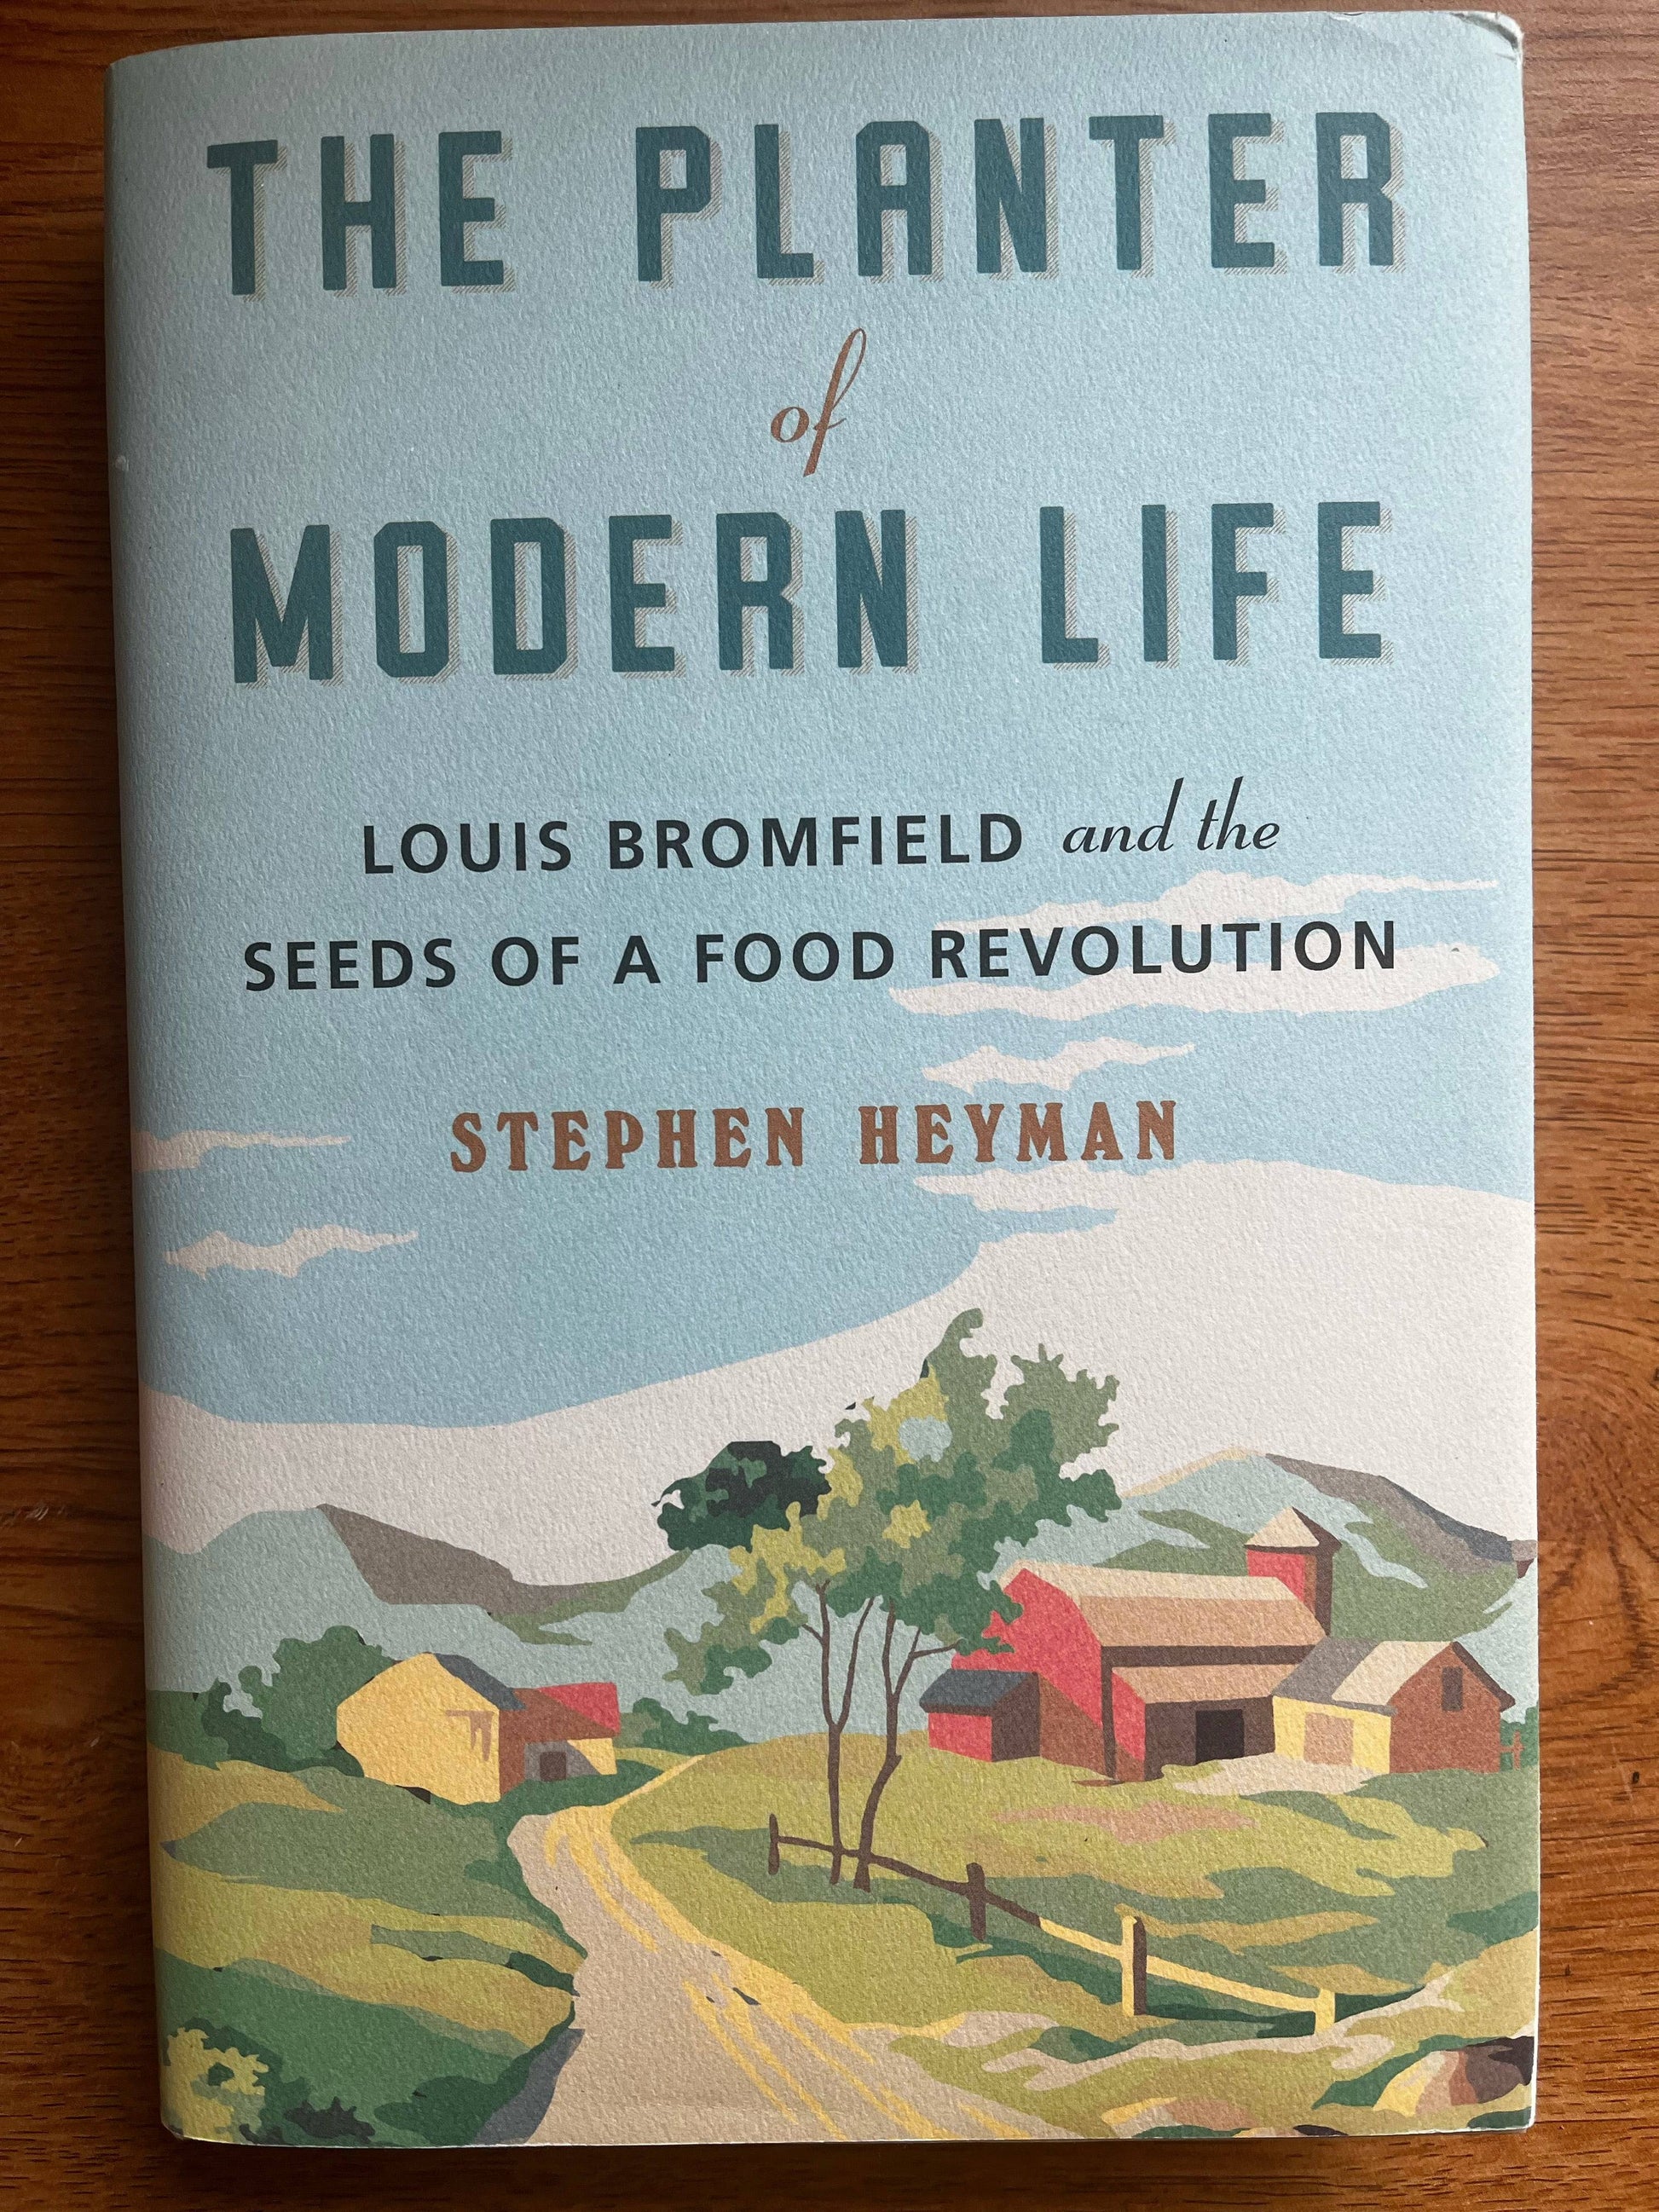 The Planter of Modern Life by Stephen Hayman - The Josephine Porter Institute